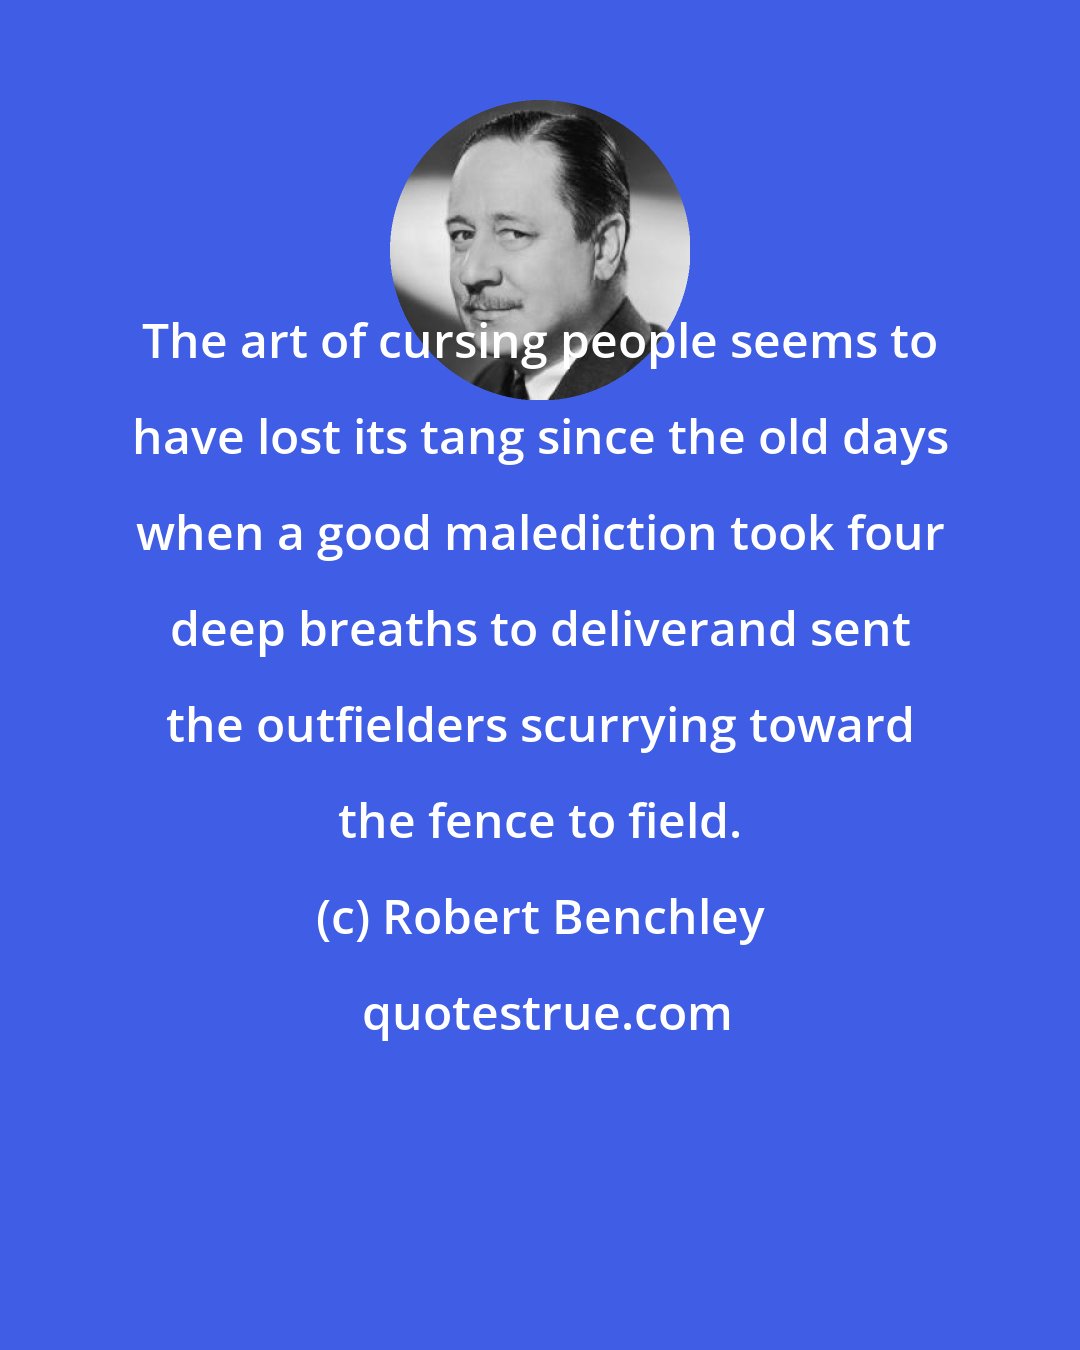 Robert Benchley: The art of cursing people seems to have lost its tang since the old days when a good malediction took four deep breaths to deliverand sent the outfielders scurrying toward the fence to field.